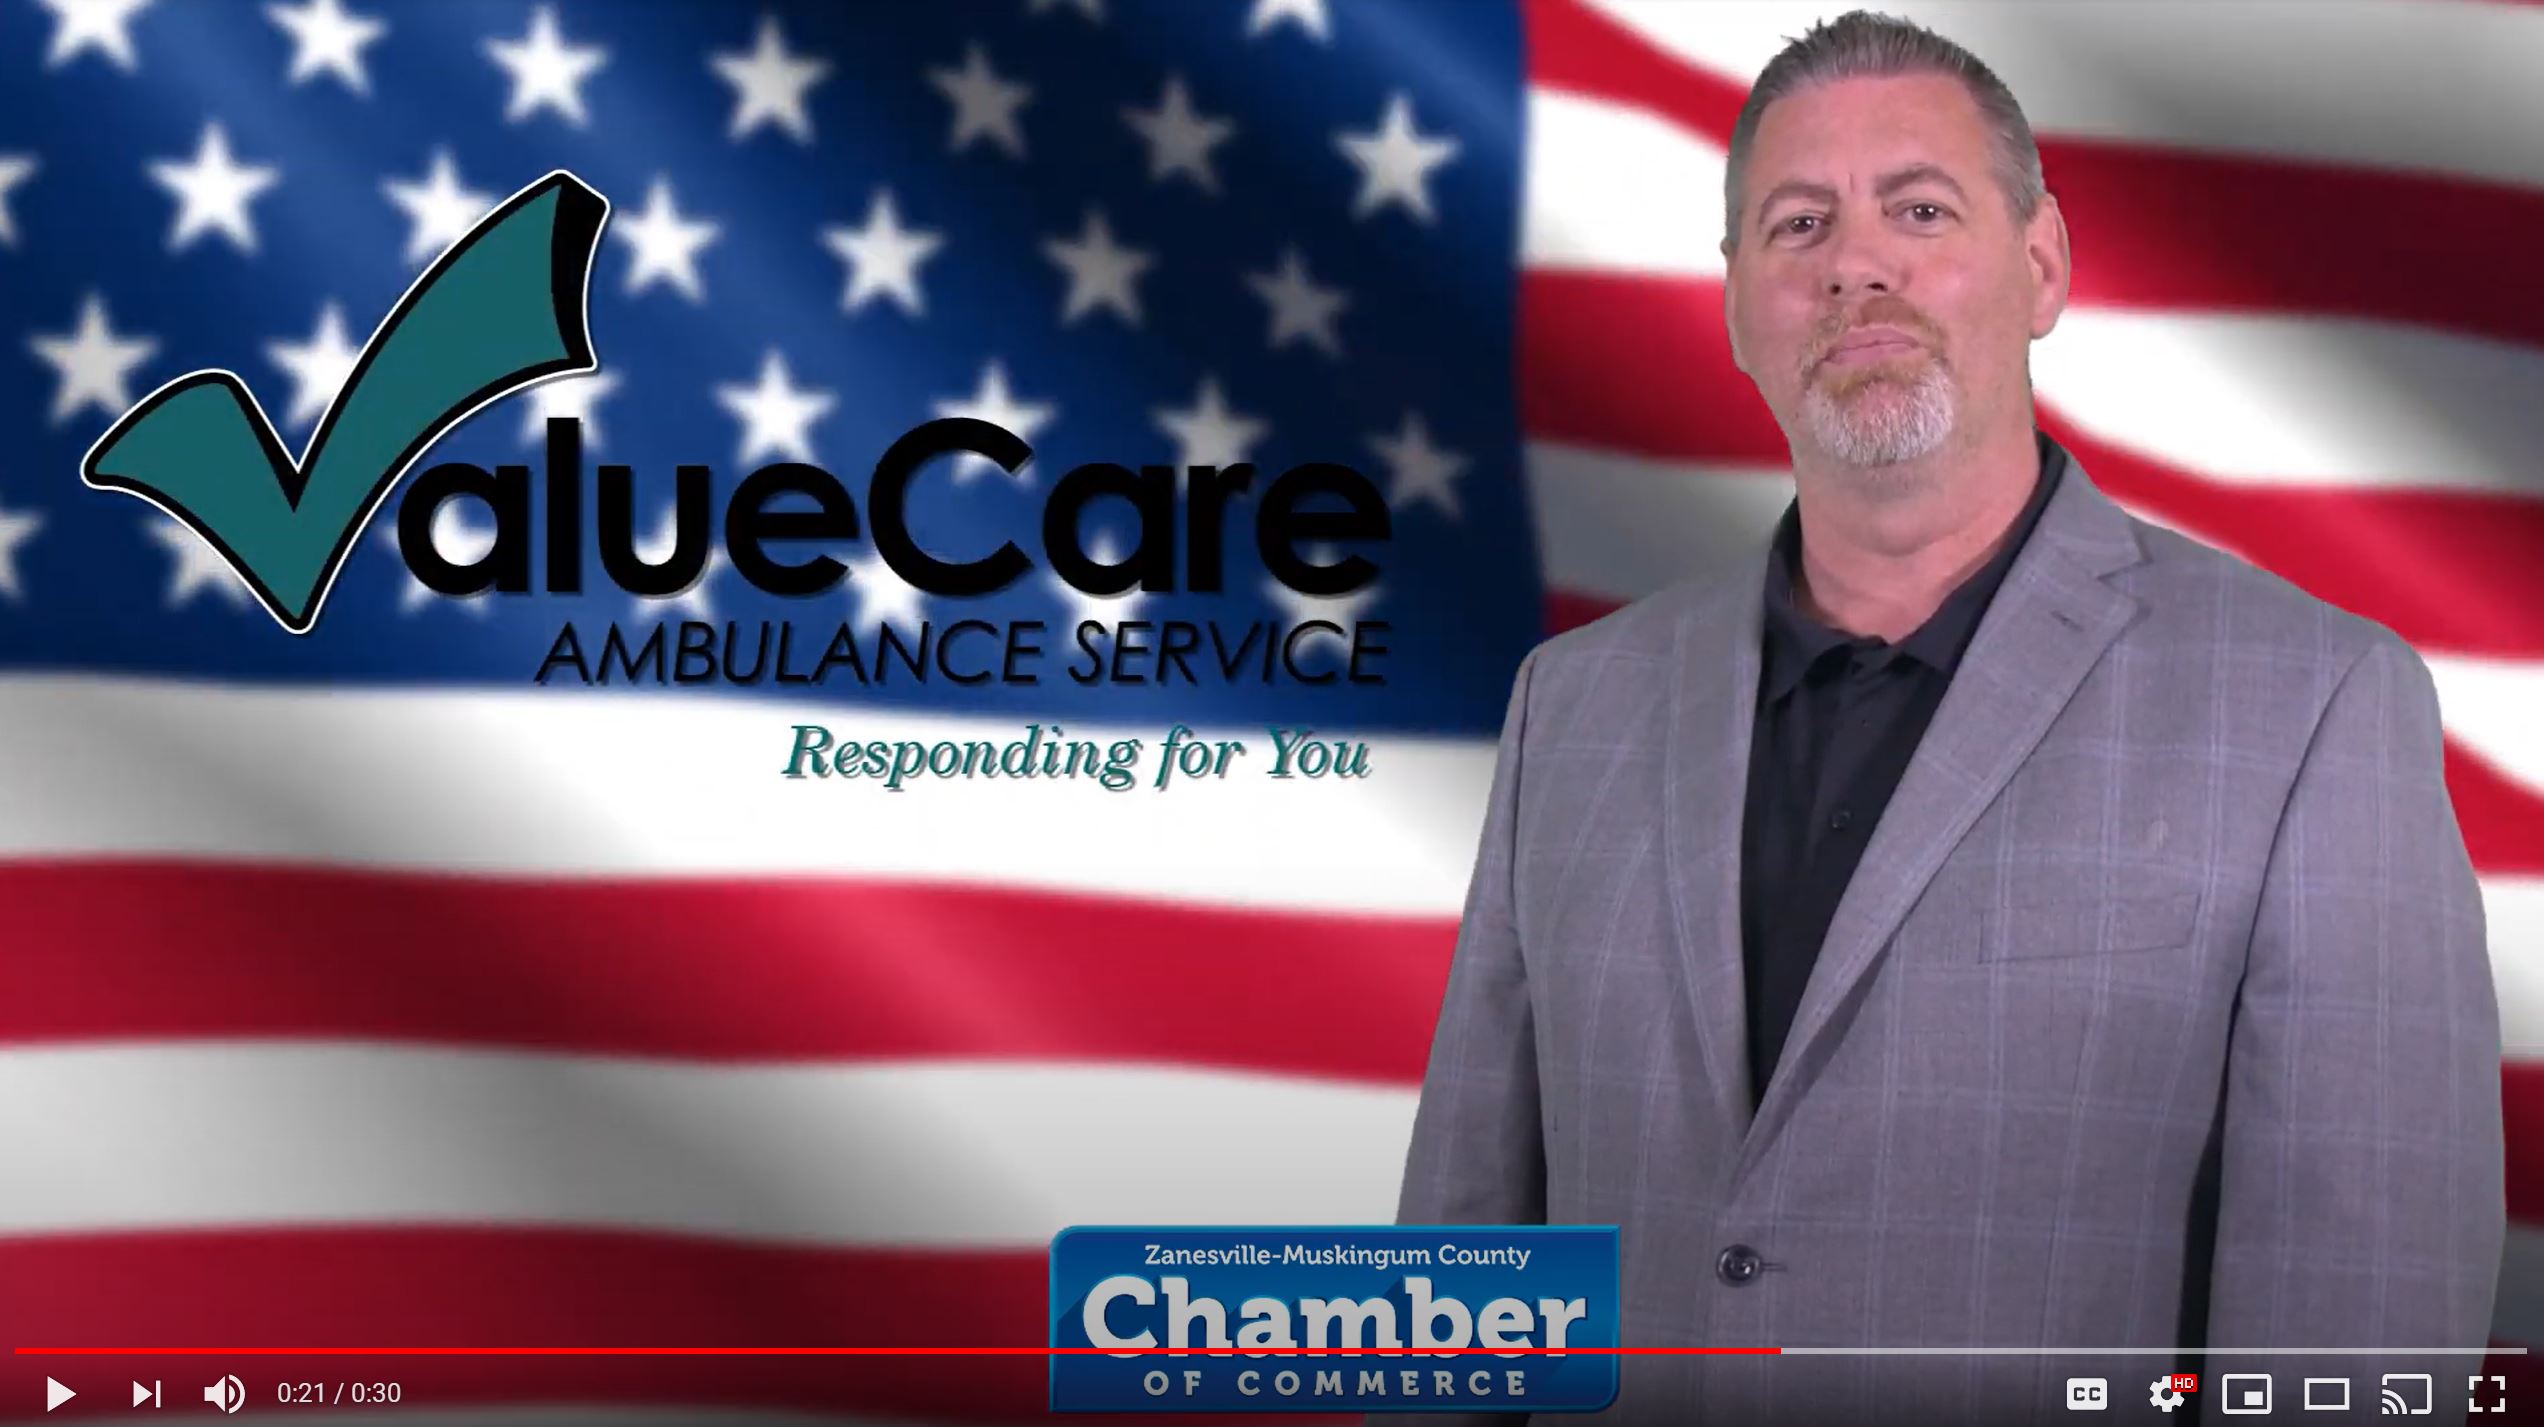 The American Spirit is live and well at hundreds of Chamber Businesses.